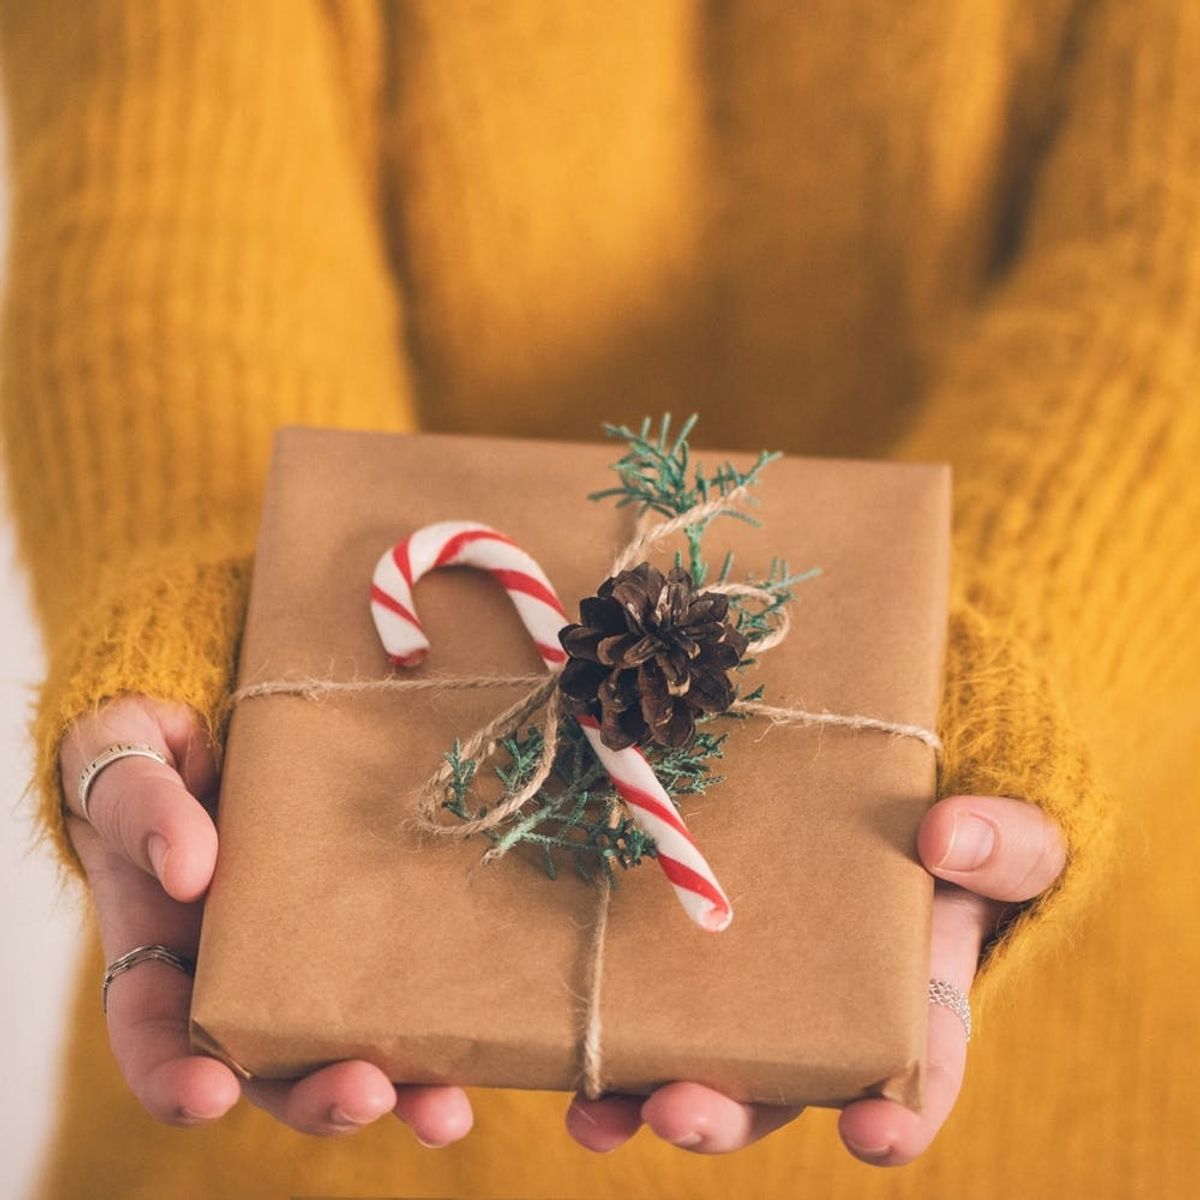 How to Make a Homemade Gift More Meaningful